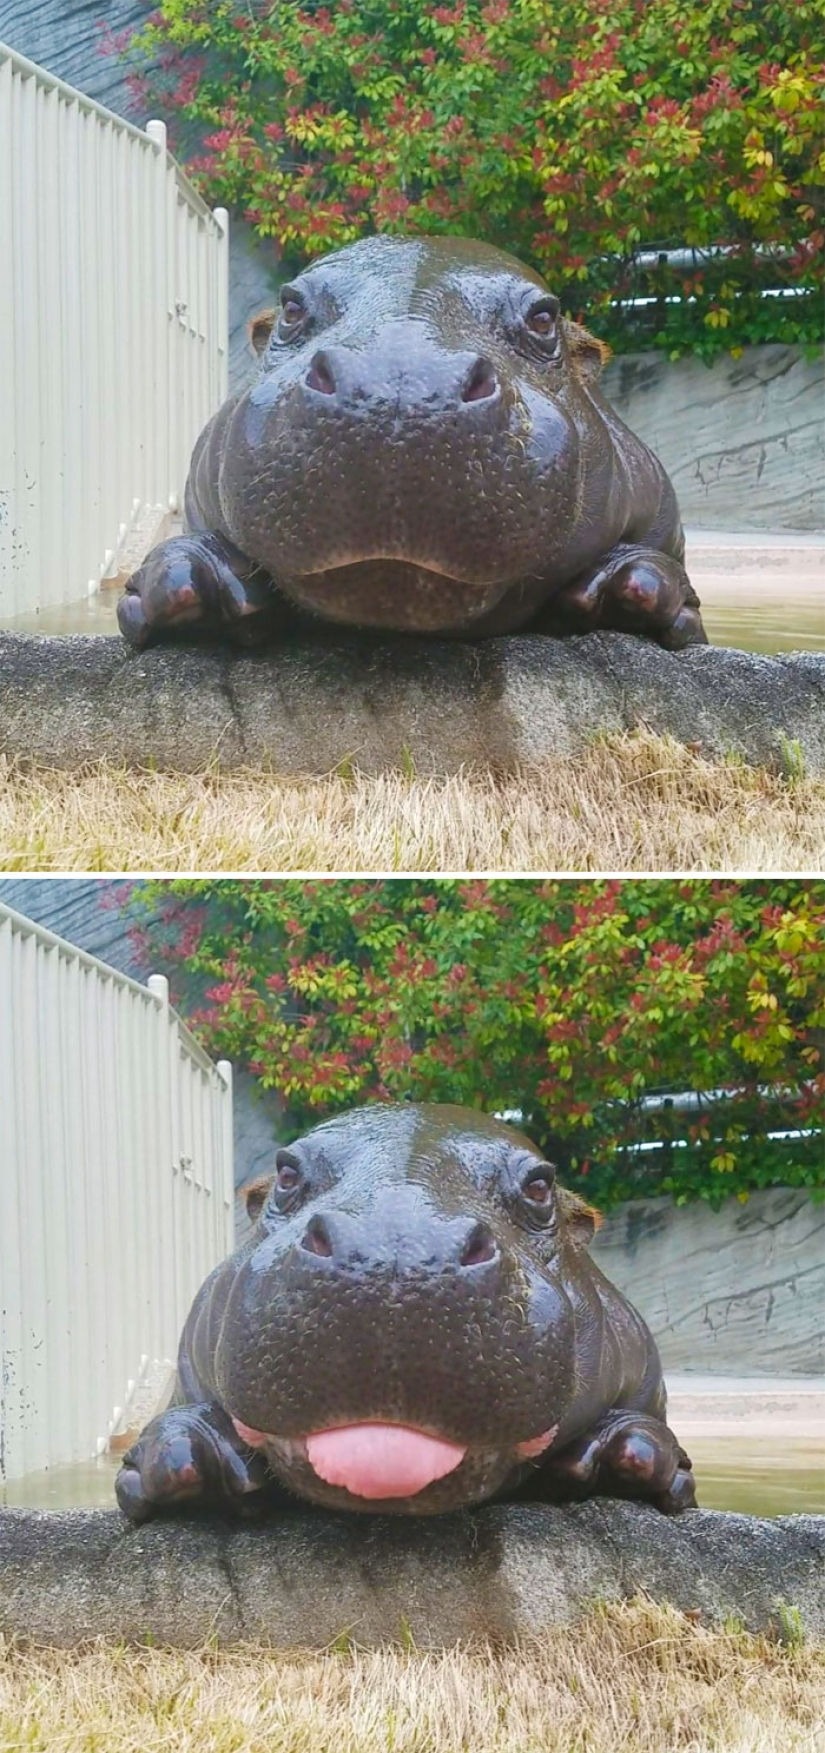 25 touching animals that "don't feed bread", just let them show their tongue